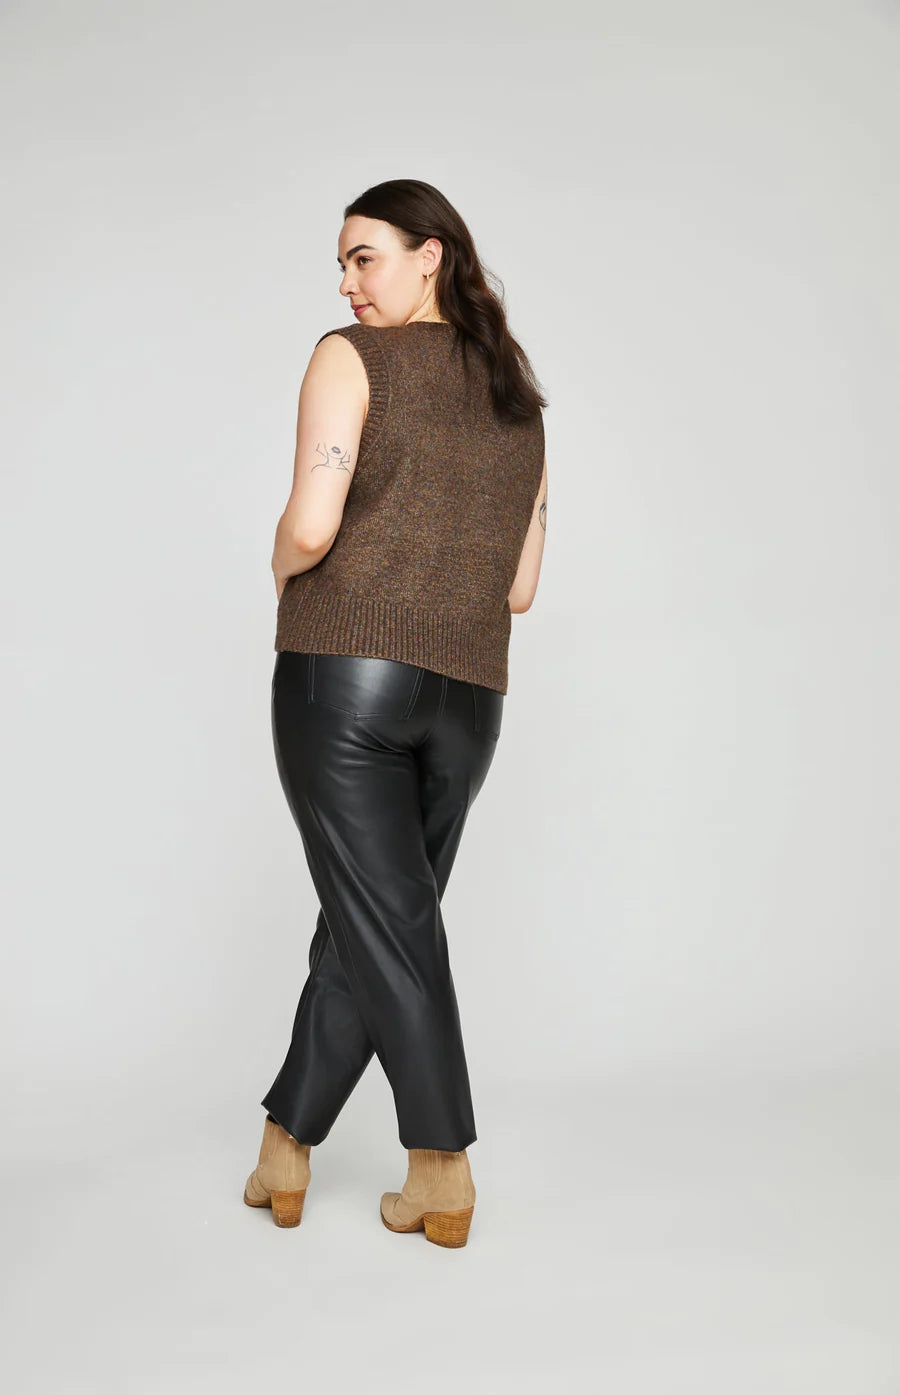 Curvy woman wearing dark brown sweater vest with black leather pant.